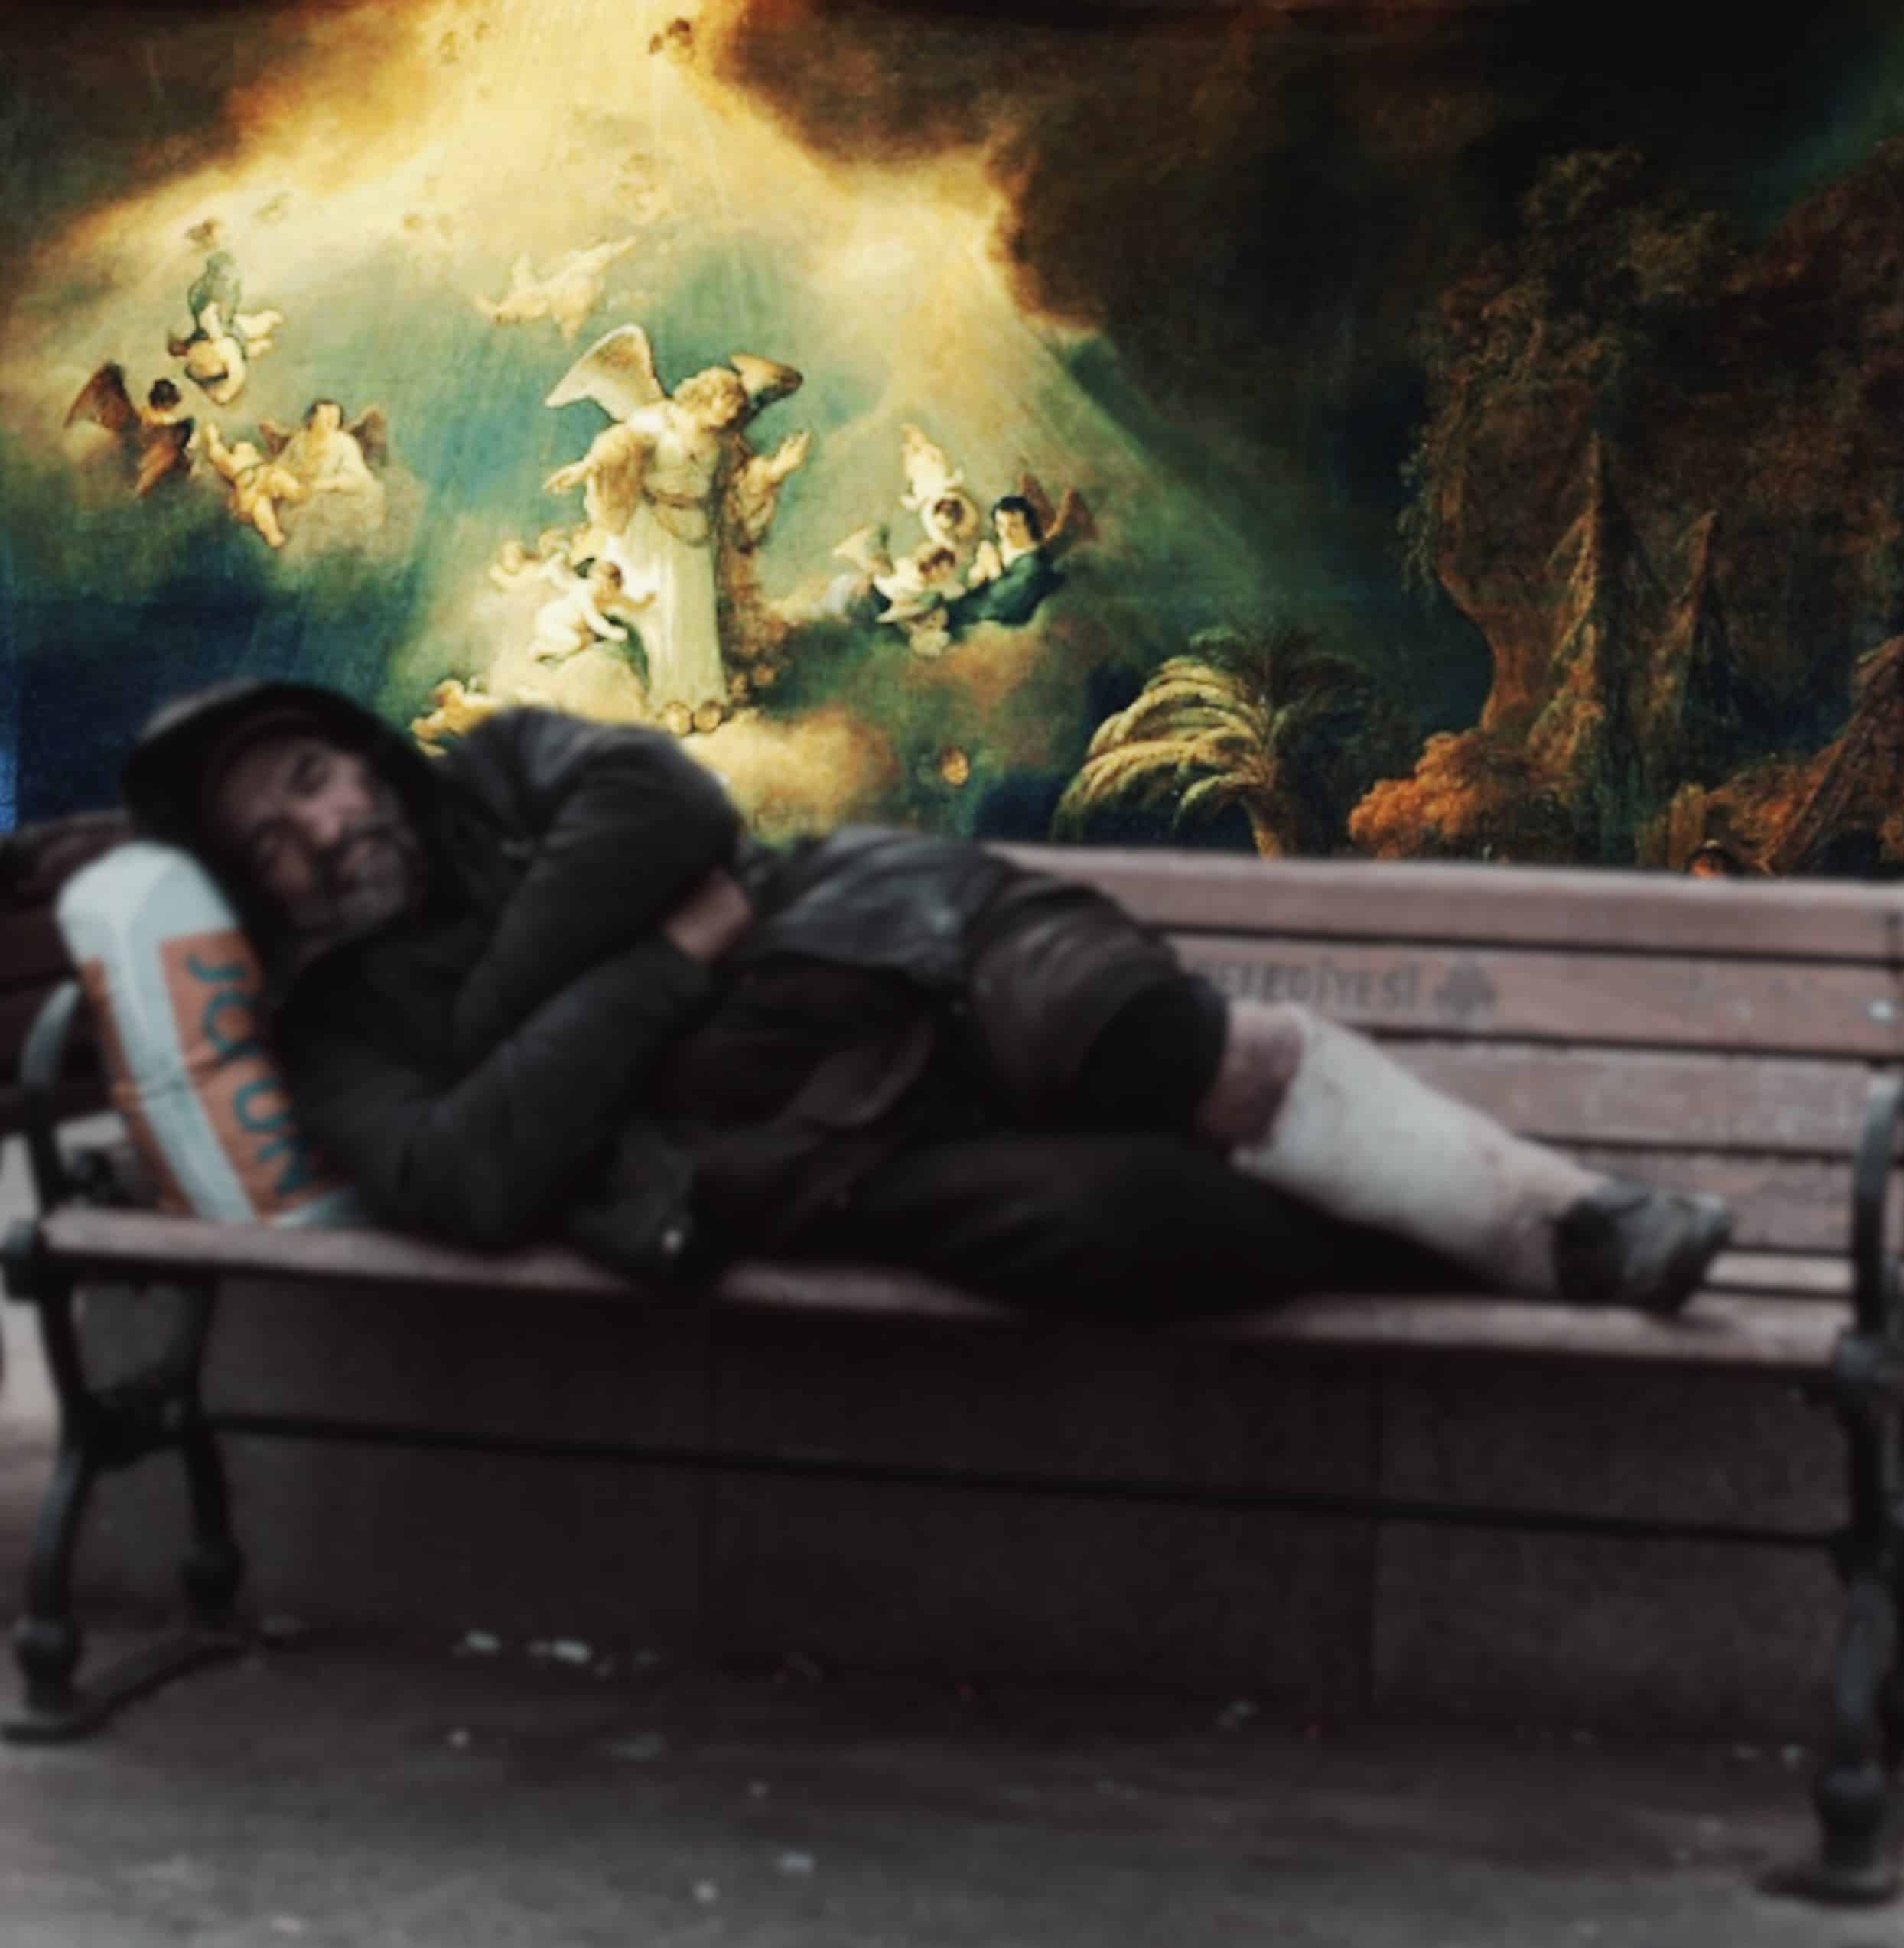 Image shows a man sleeping in the rough on an outdoor bench with a vibrant angelic scene behind him.